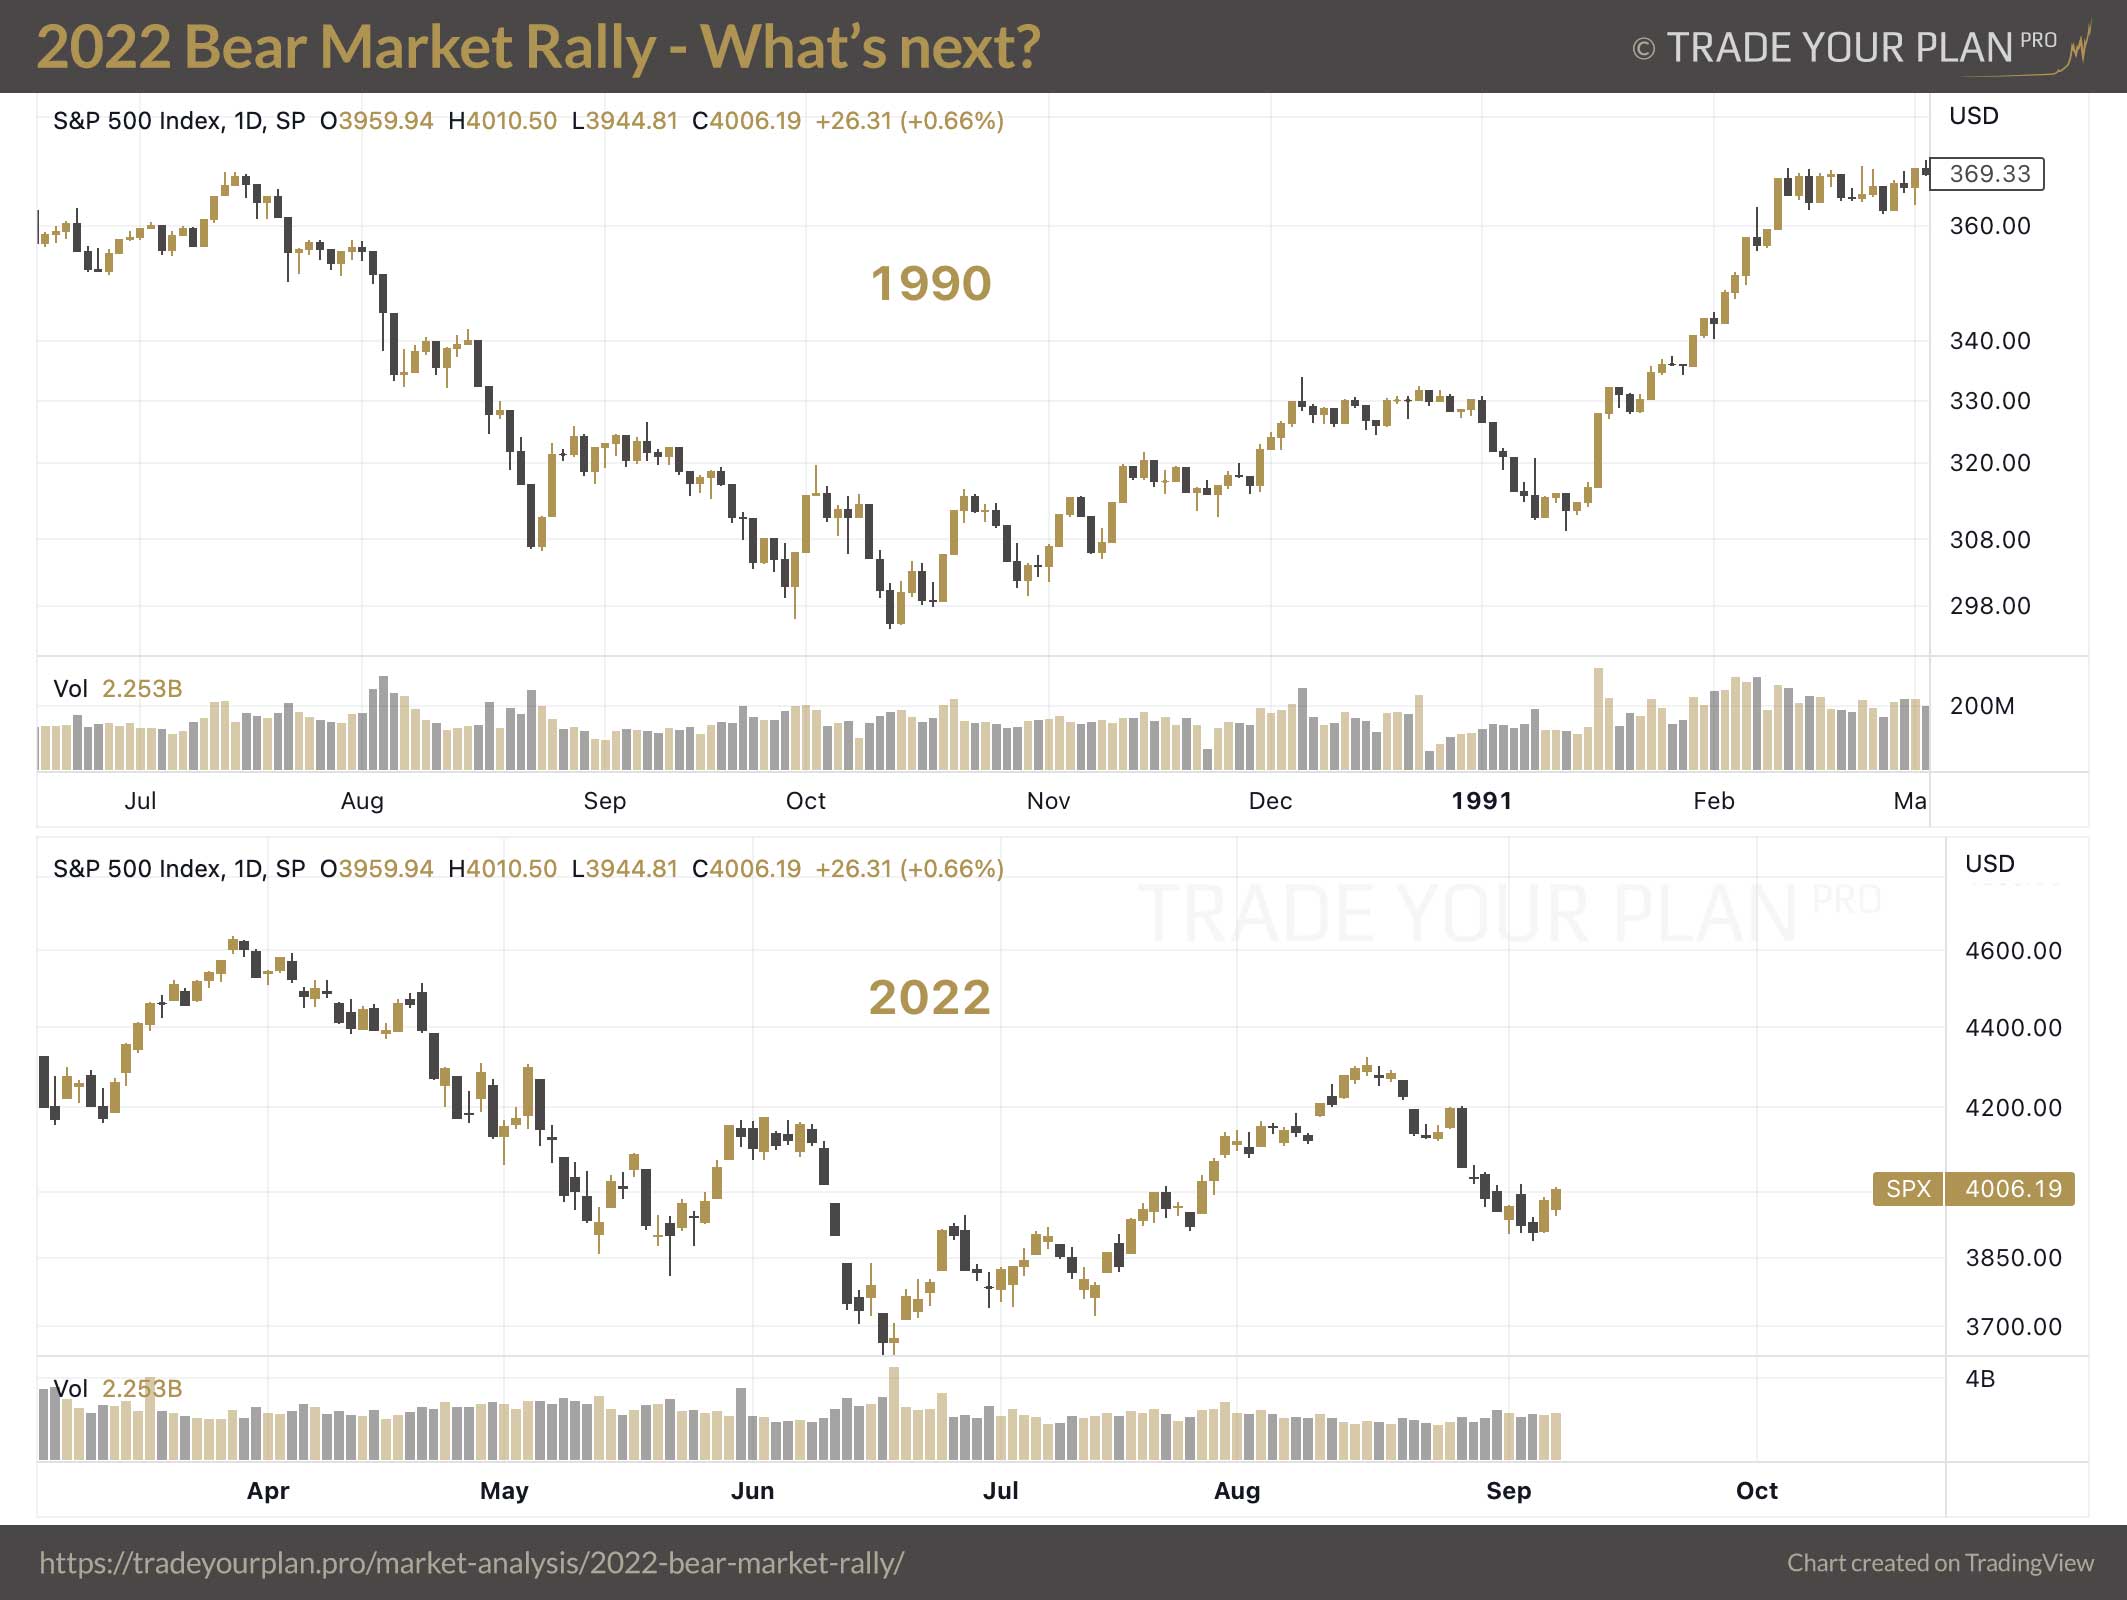 Trade Your Plan PRO - 2022 Bear Market Rally - What's Next?